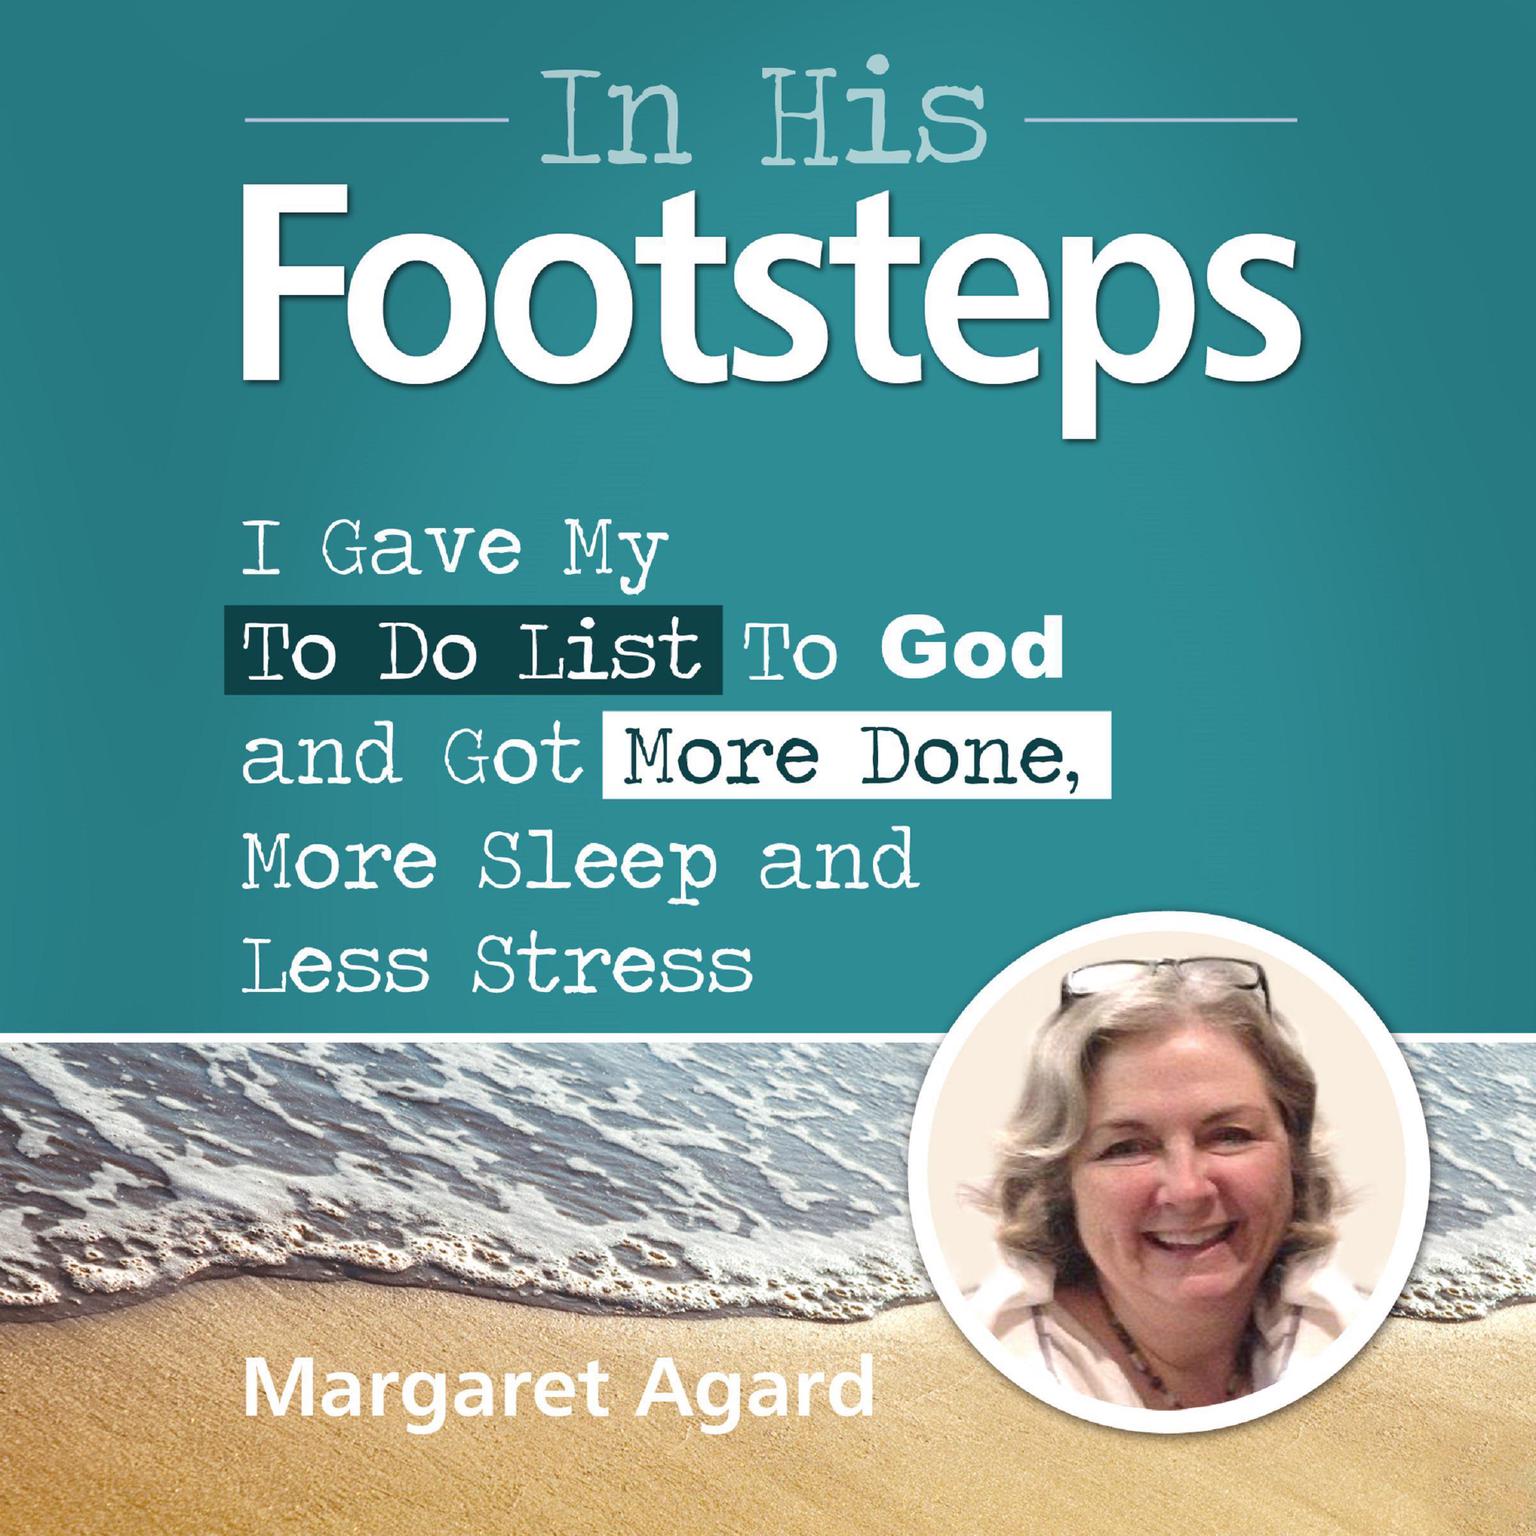 In His Footsteps : I Gave My To Do List To God and Got More Done, More Sleep and Less Stress: I Gave My To Do List To God and Got More Done, More Sleep and Less Stress Audiobook, by Margaret Agard